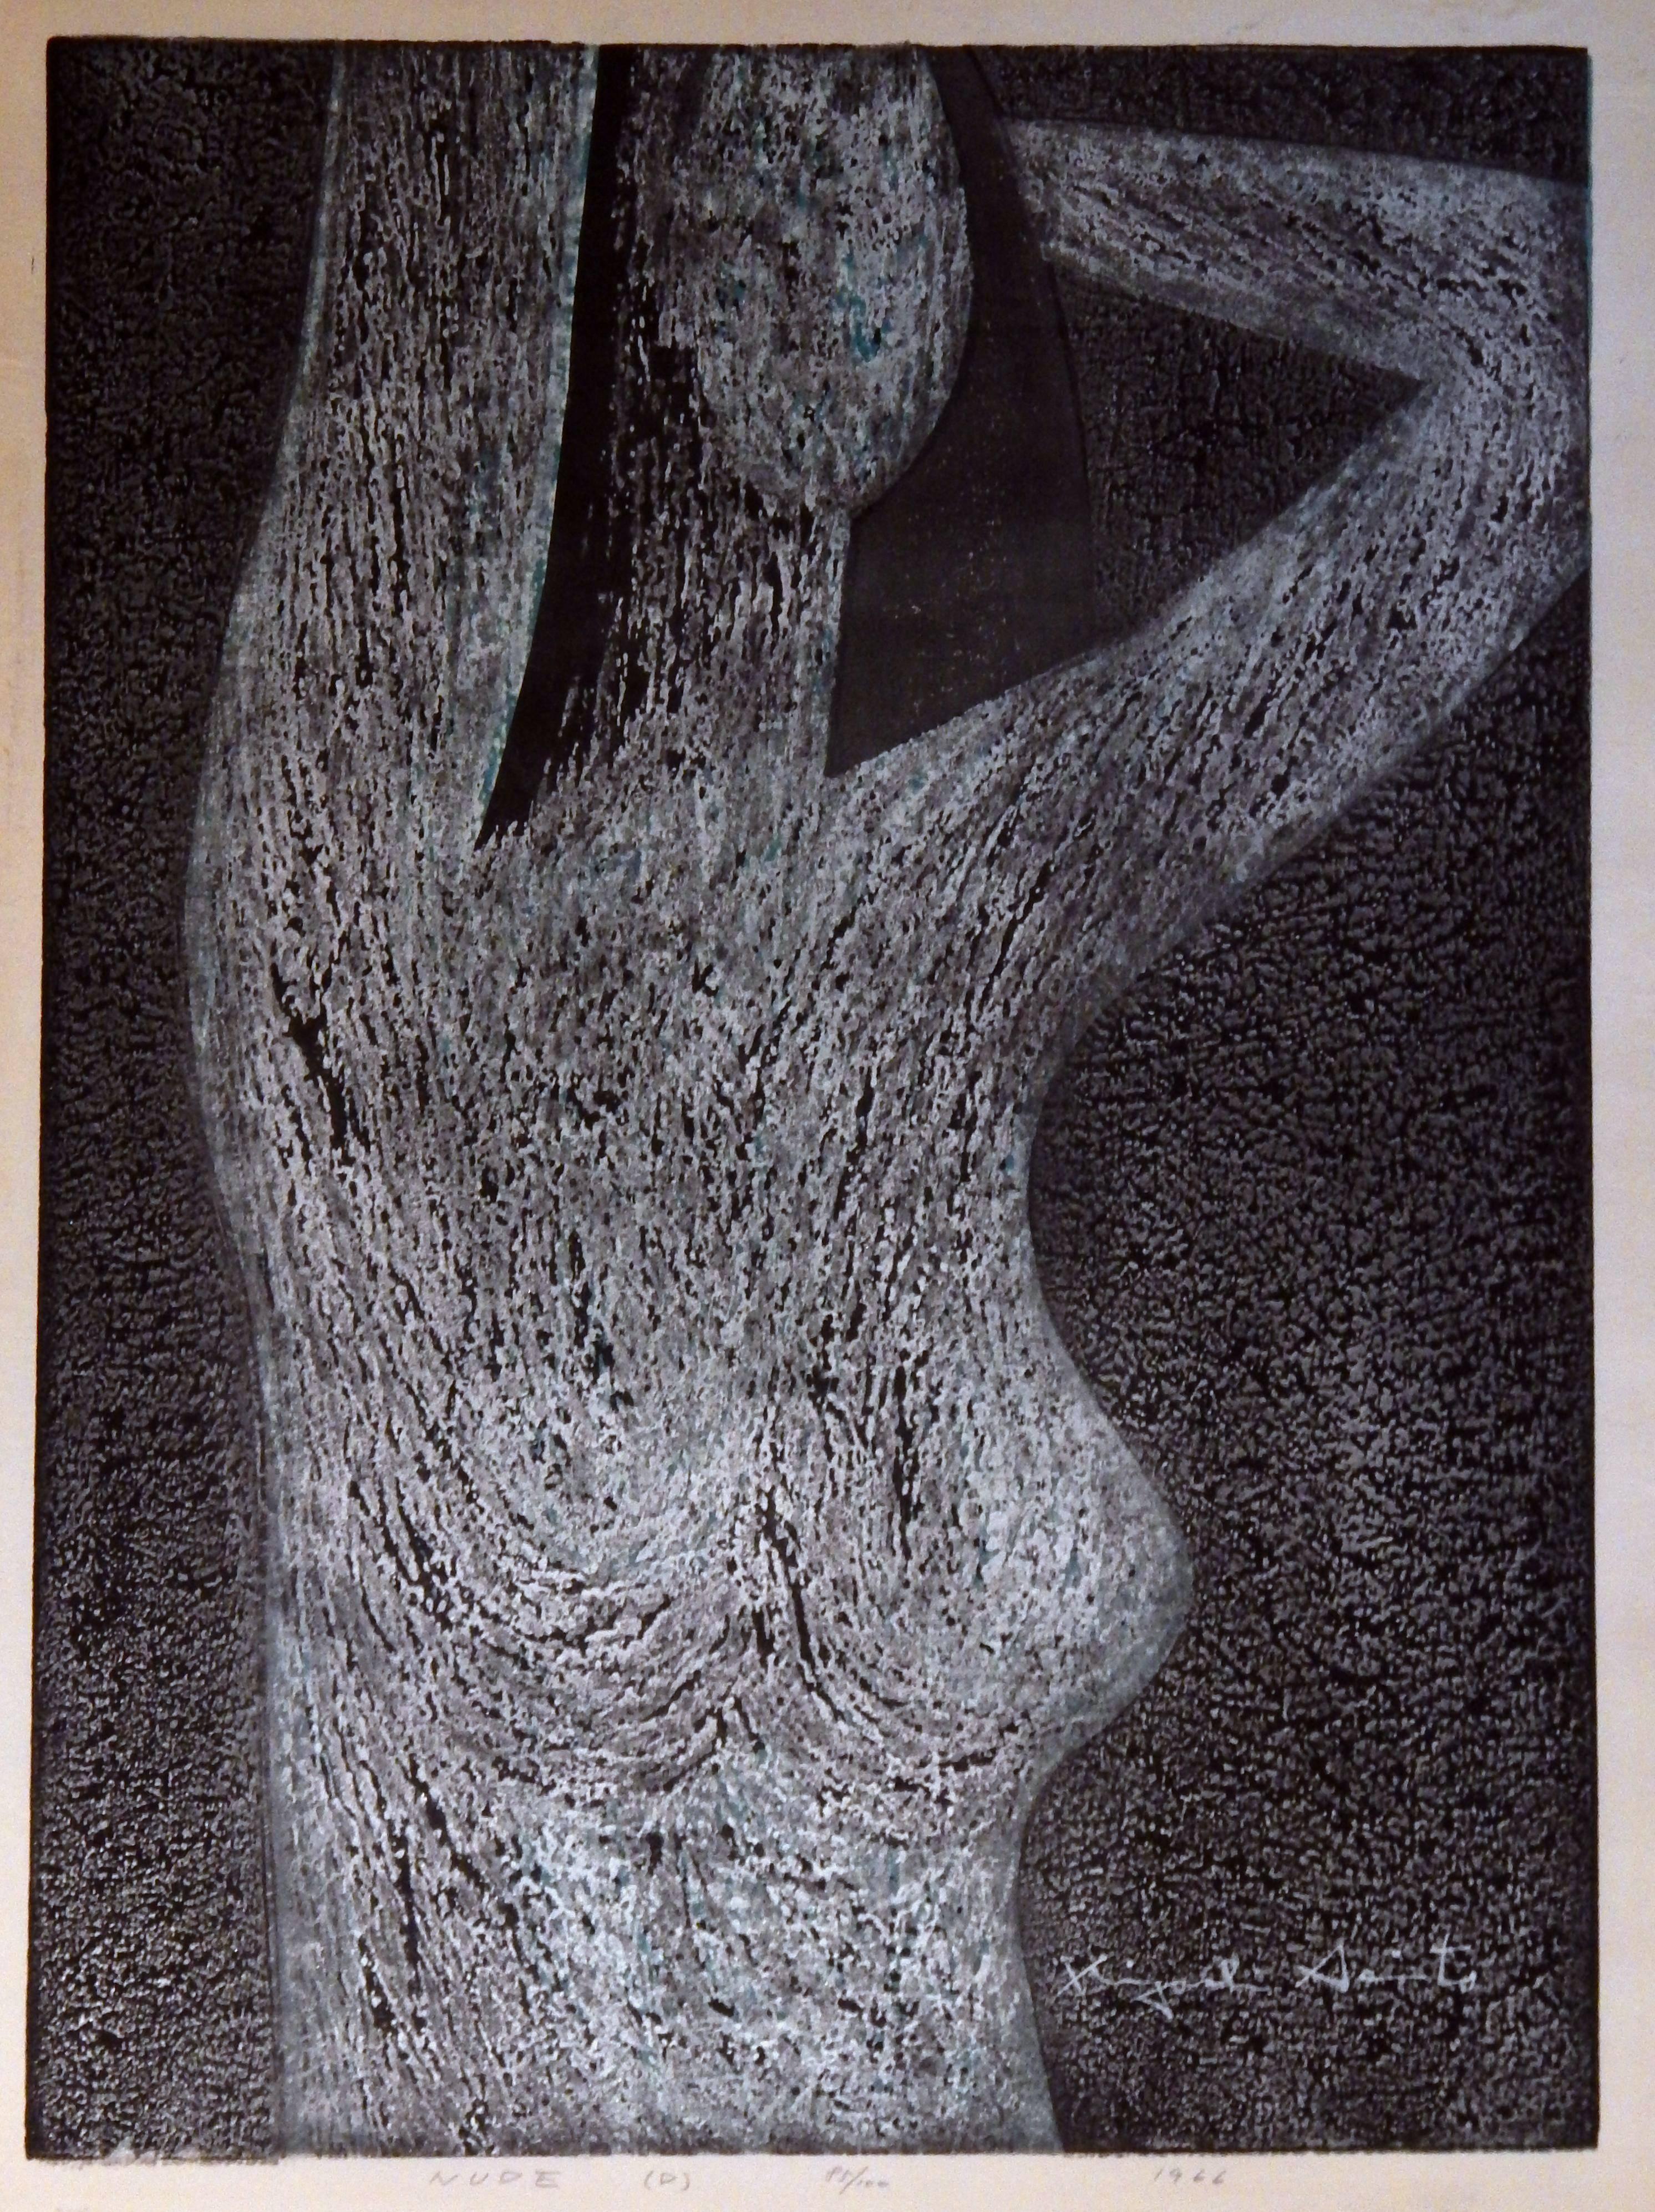 Kiyoshi Saito (1907-1997) color woodblock print, 1977 titled in lower center: Nude. Signed lower right in the image: Kiyoshi Saito Edition Size in pencil: 85 of 100 Image size: 20 3/4 inches high x 15 1/4 inches wide. Paper size: 23 inches high x 17